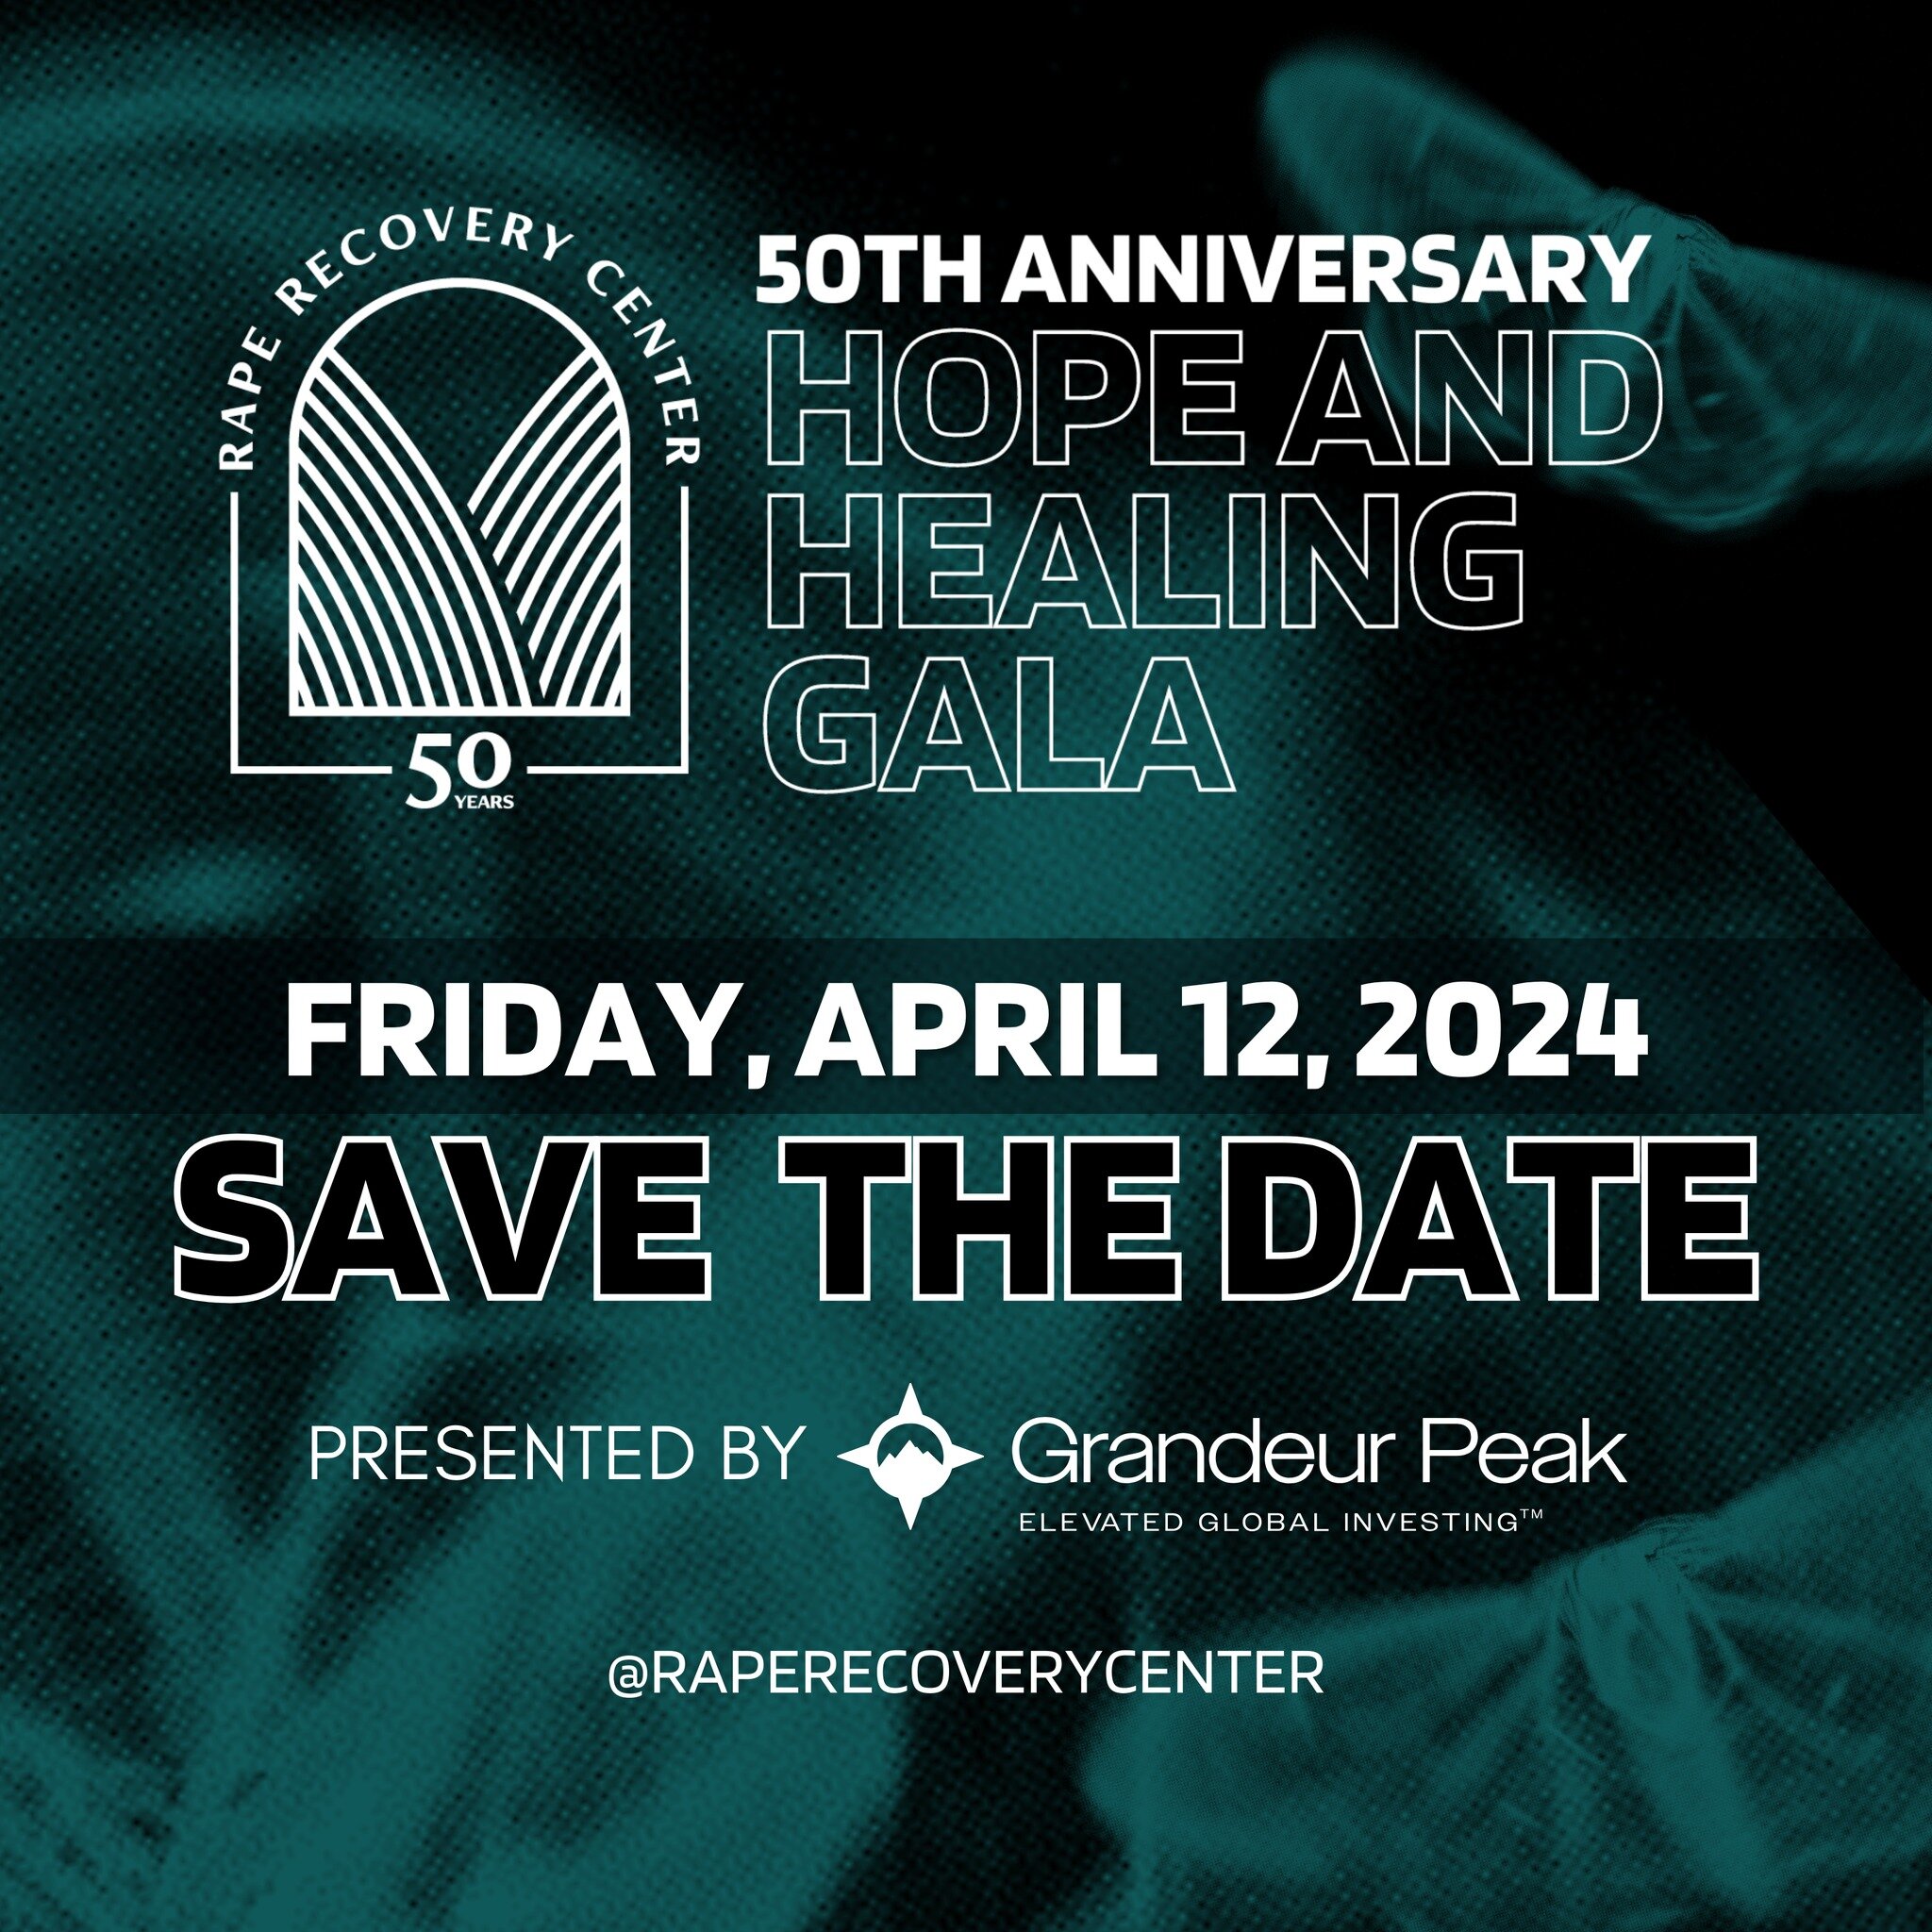 ✨ On April 12, the Rape Recovery Center will be holding our annual Hope and Healing Gala. We are excited to announce that the event will be held at the Regent Street Black Box at The Eccles Theater this year. Join us as we reflect on 50 years of comm